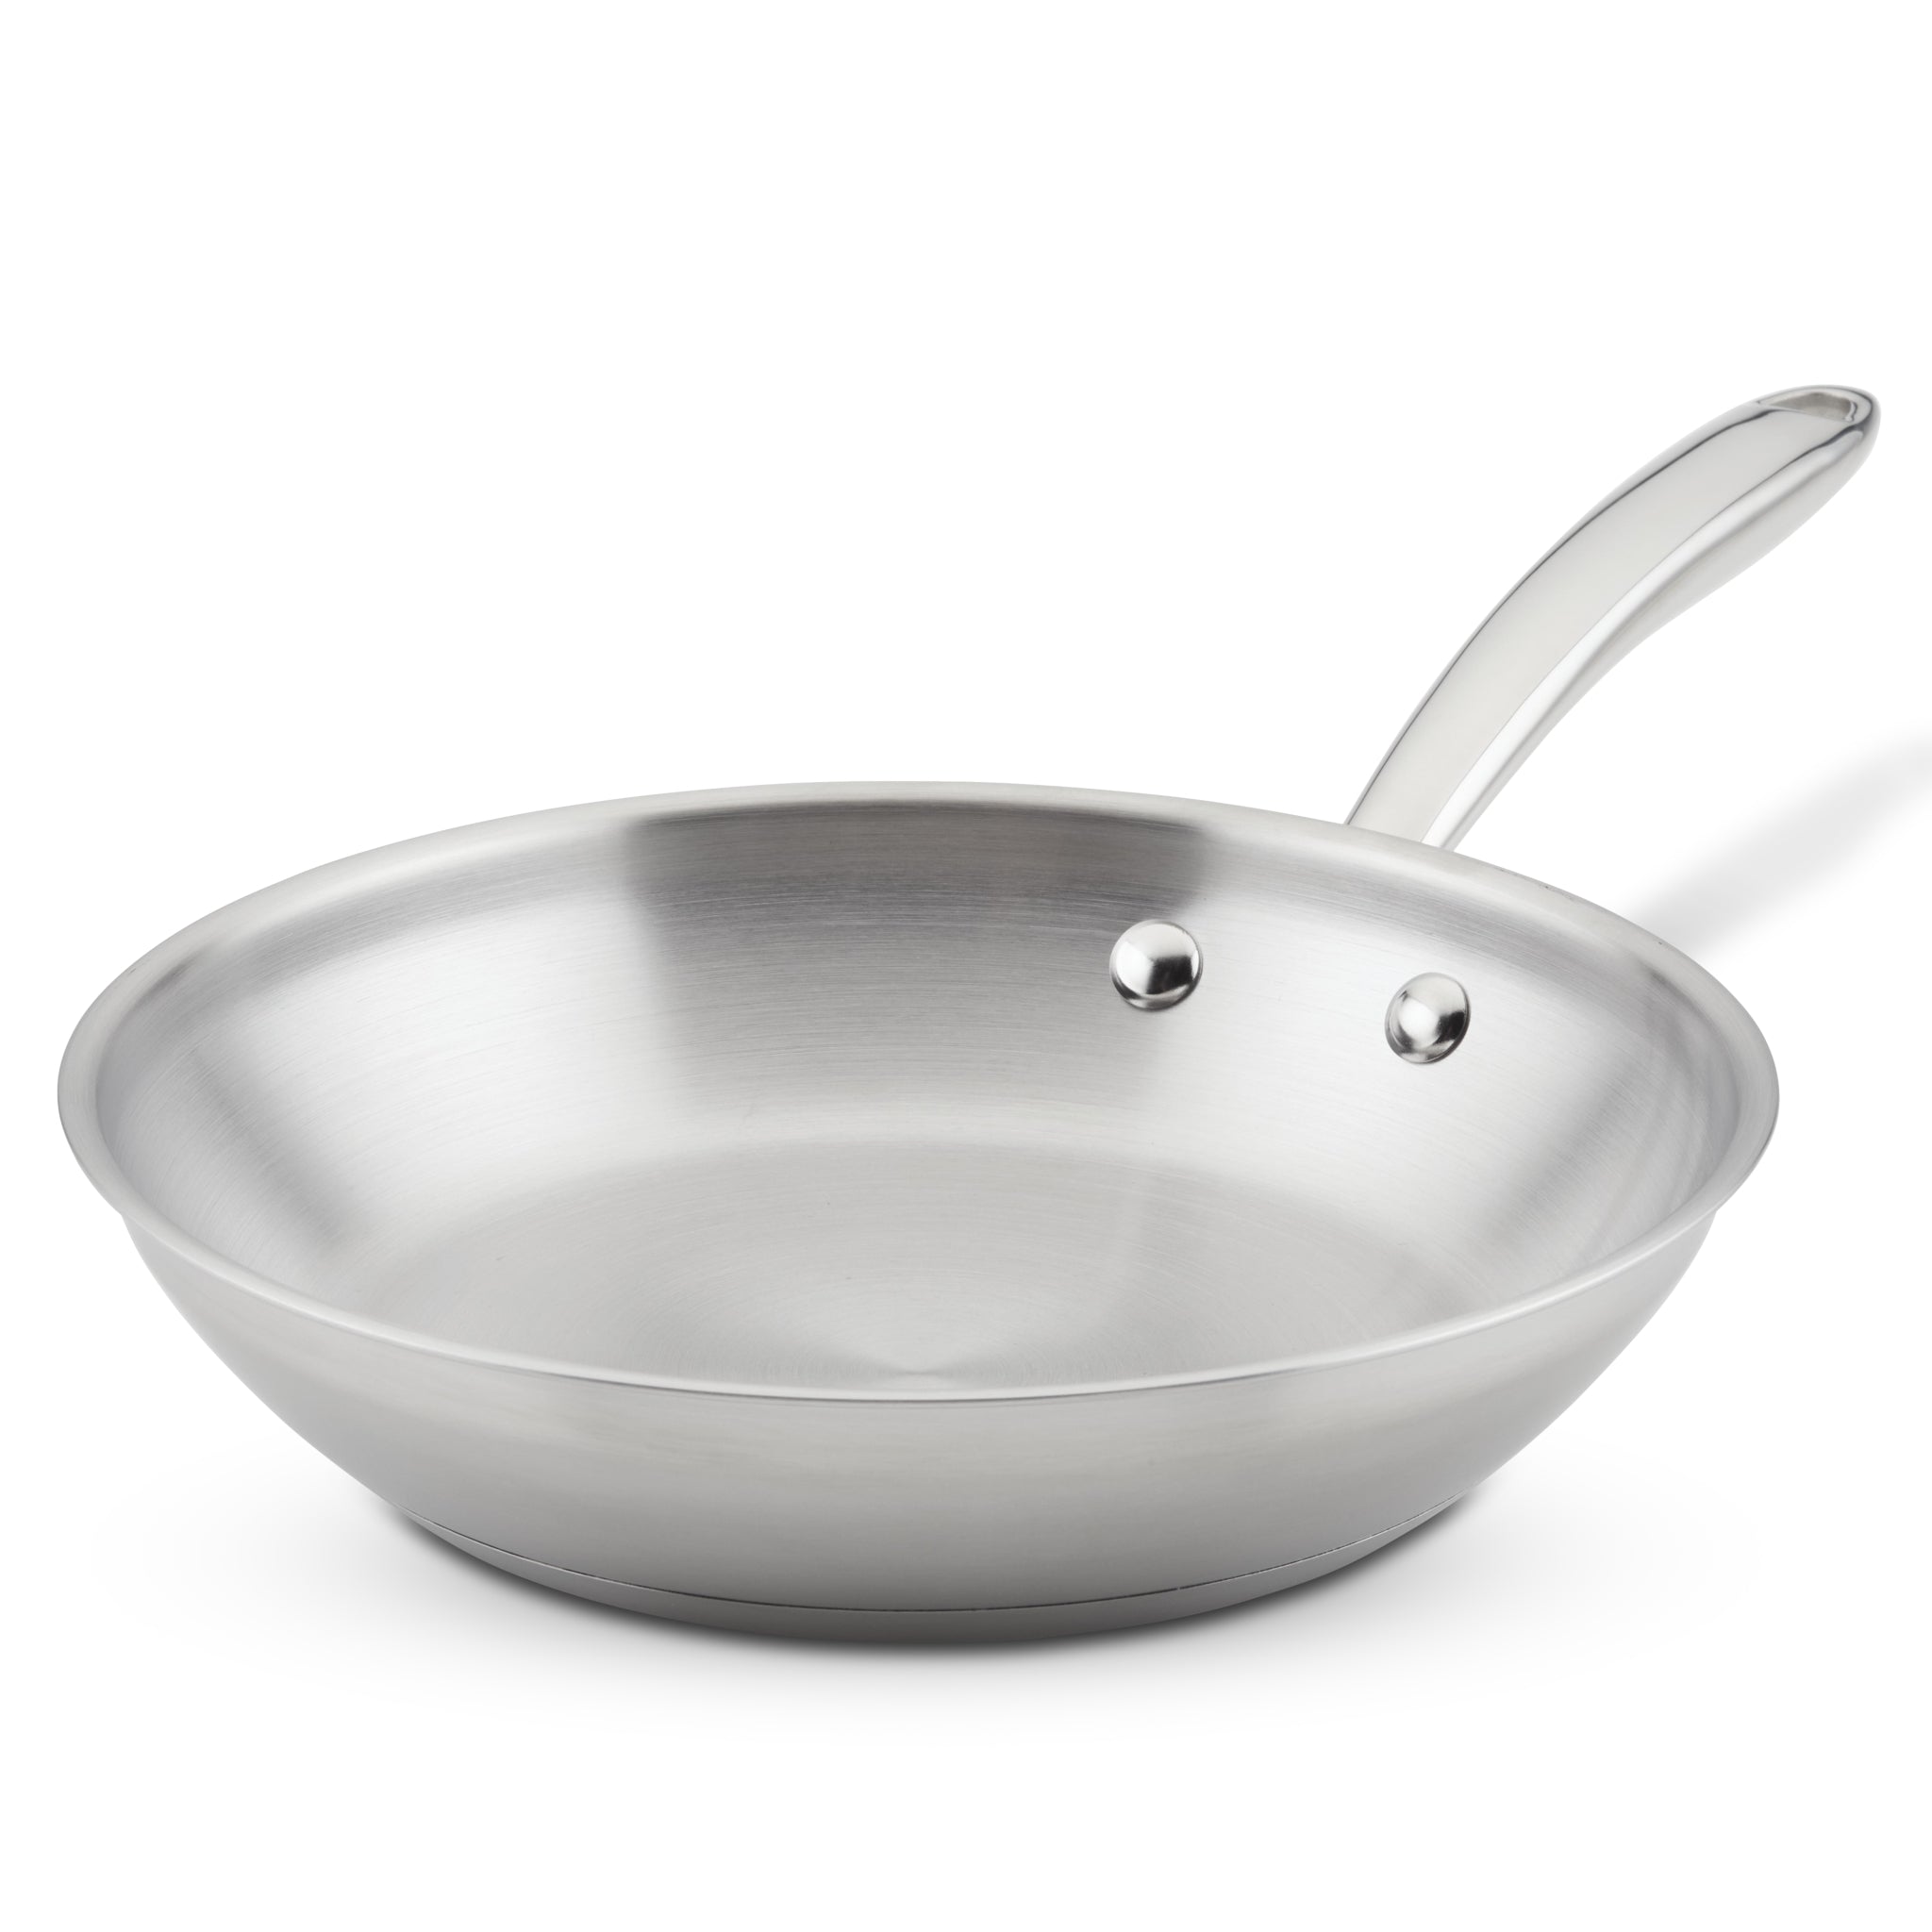 10 Stainless Steel Skillet and Lid